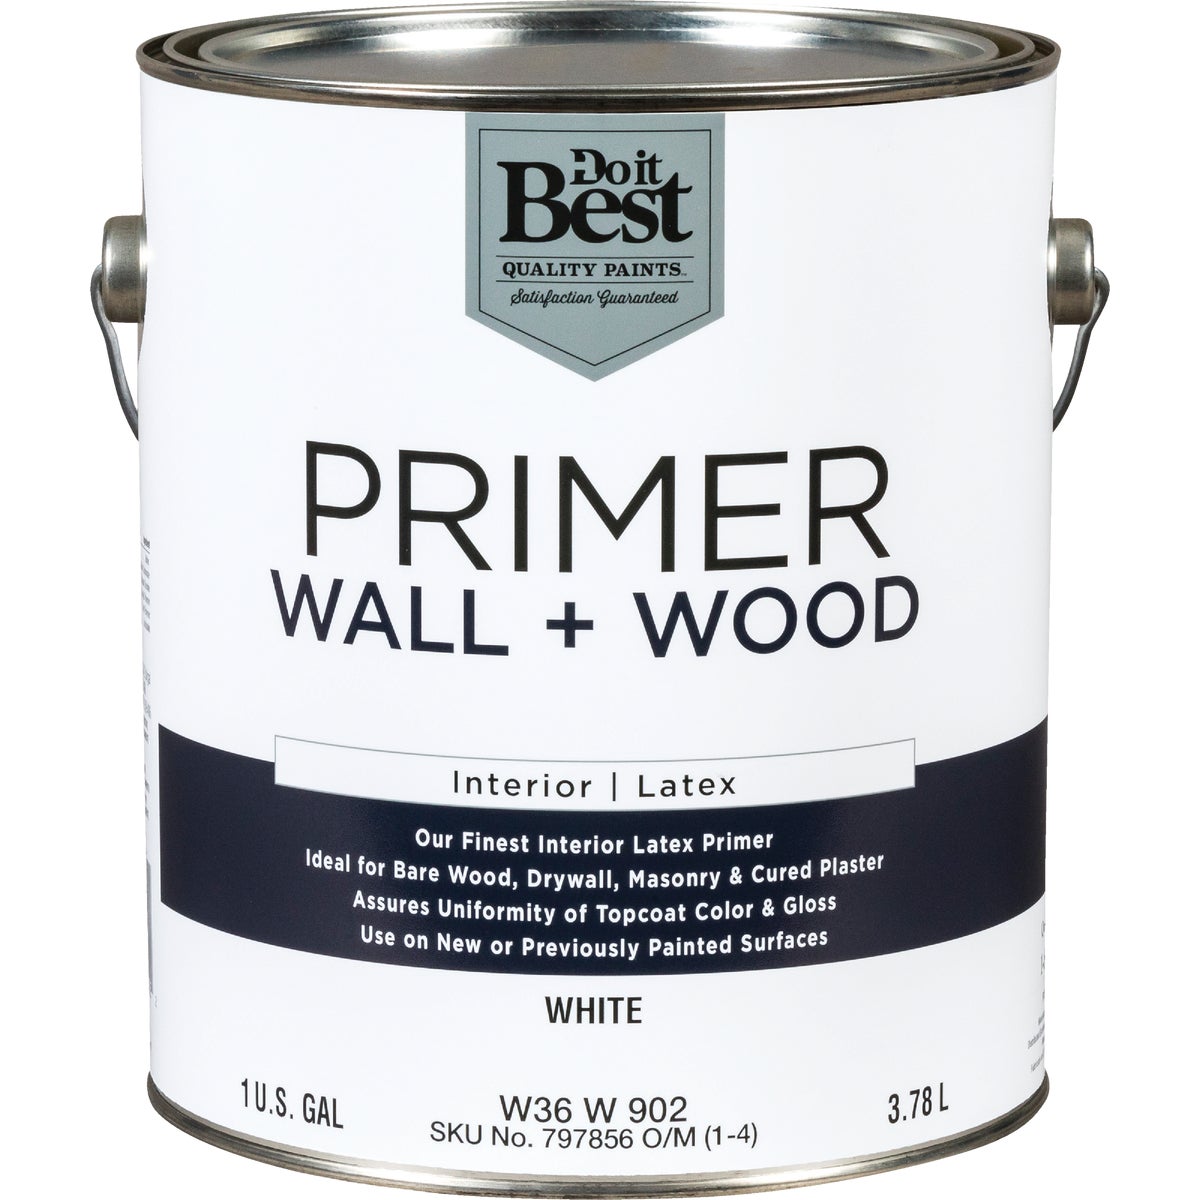 Item 797856, This is our finest interior latex primer.